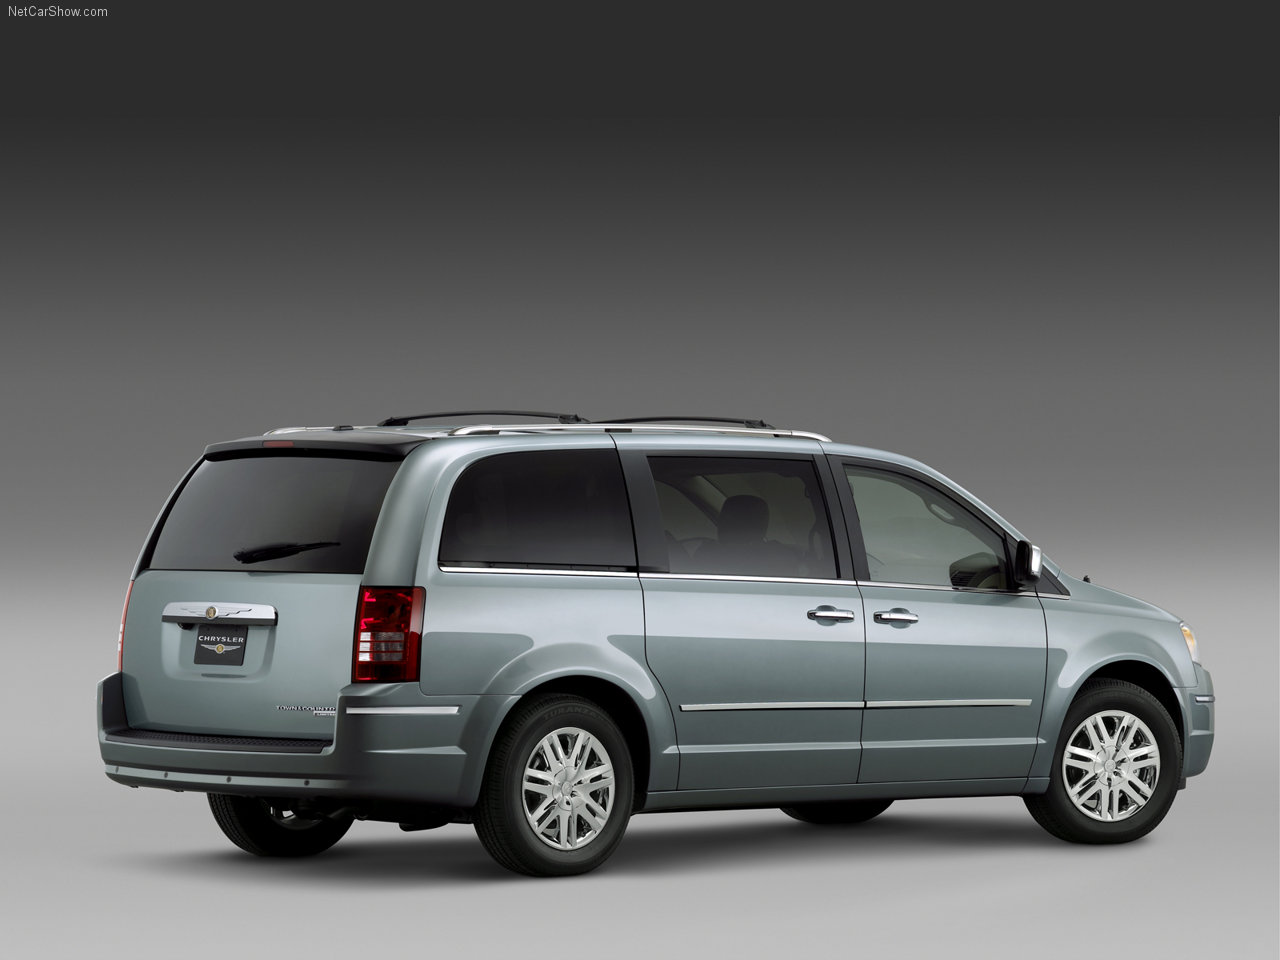 chrysler-town_and_country-2008-1280-04.jpg